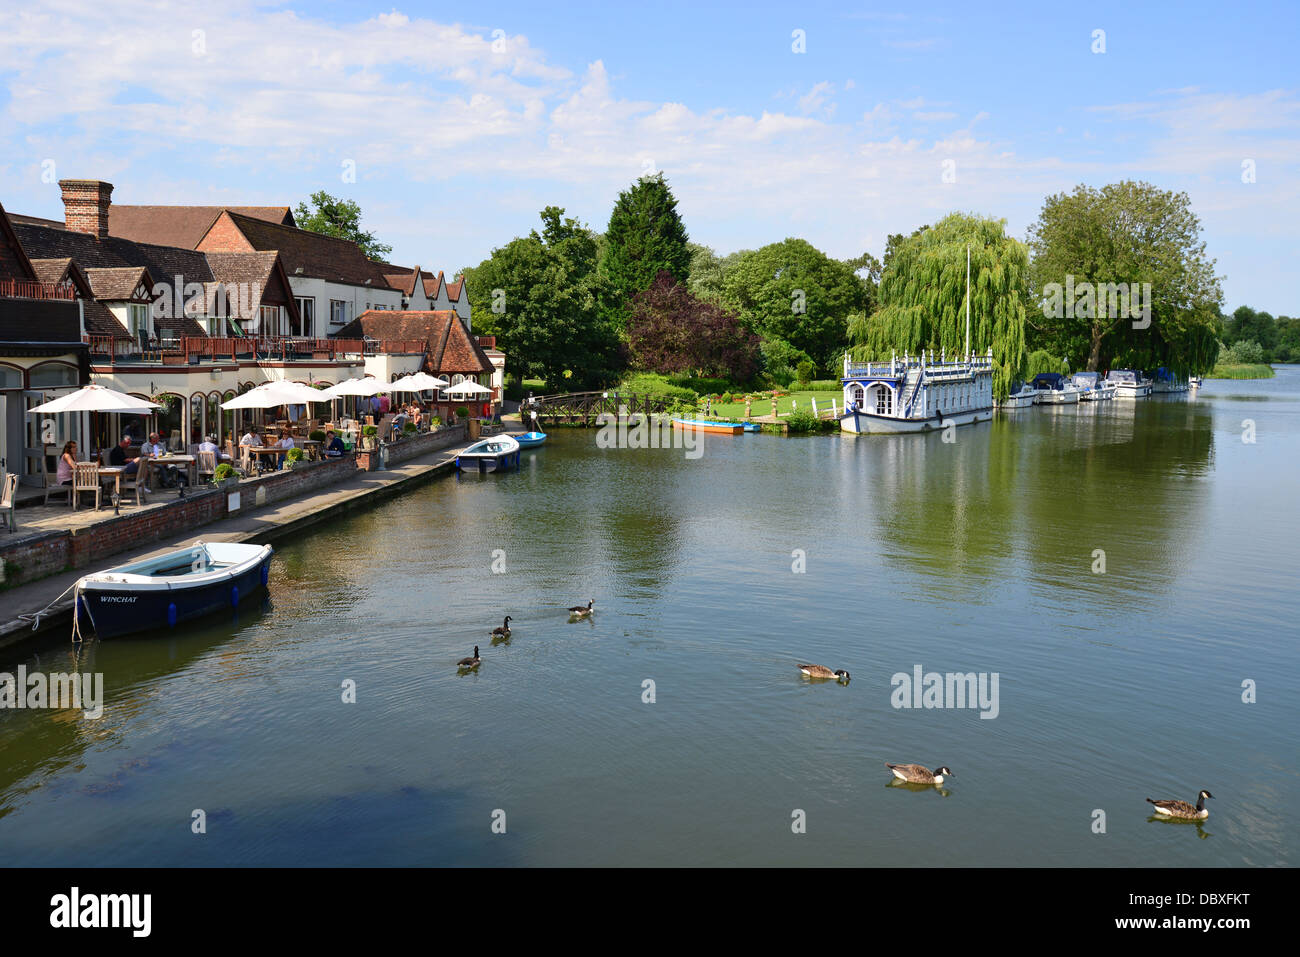 The Swan at Streatley Hotel and River Thames, Streatley, Berkshire, England, United Kingdom Stock Photo